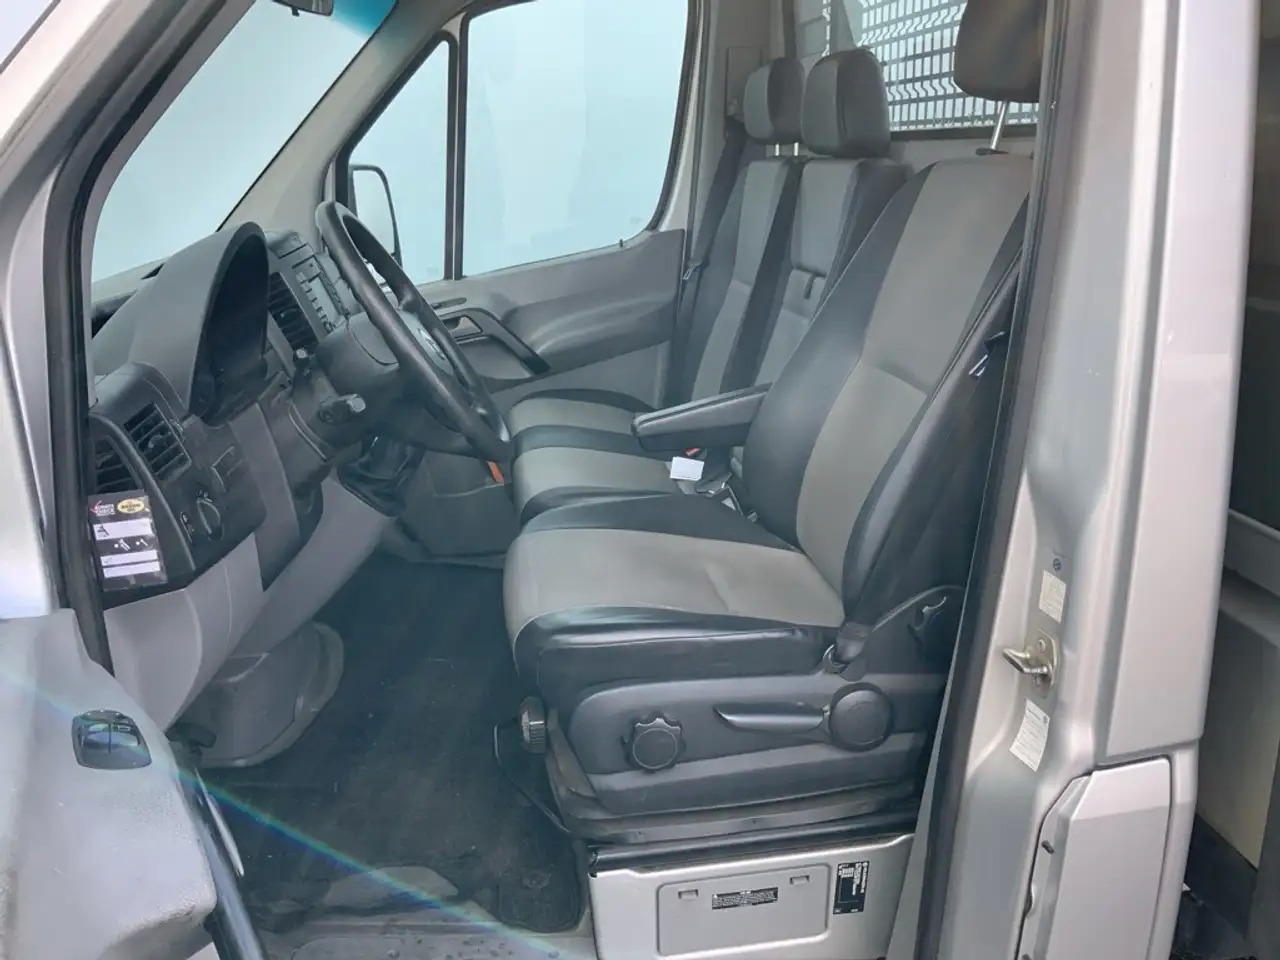 Leasing Volkswagen Crafter 46 2.0 TDI L2H1 Pick Up Airco Navi Cruise 3 Zits E Volkswagen Crafter 46 2.0 TDI L2H1 Pick Up Airco Navi Cruise 3 Zits E: gambar 5